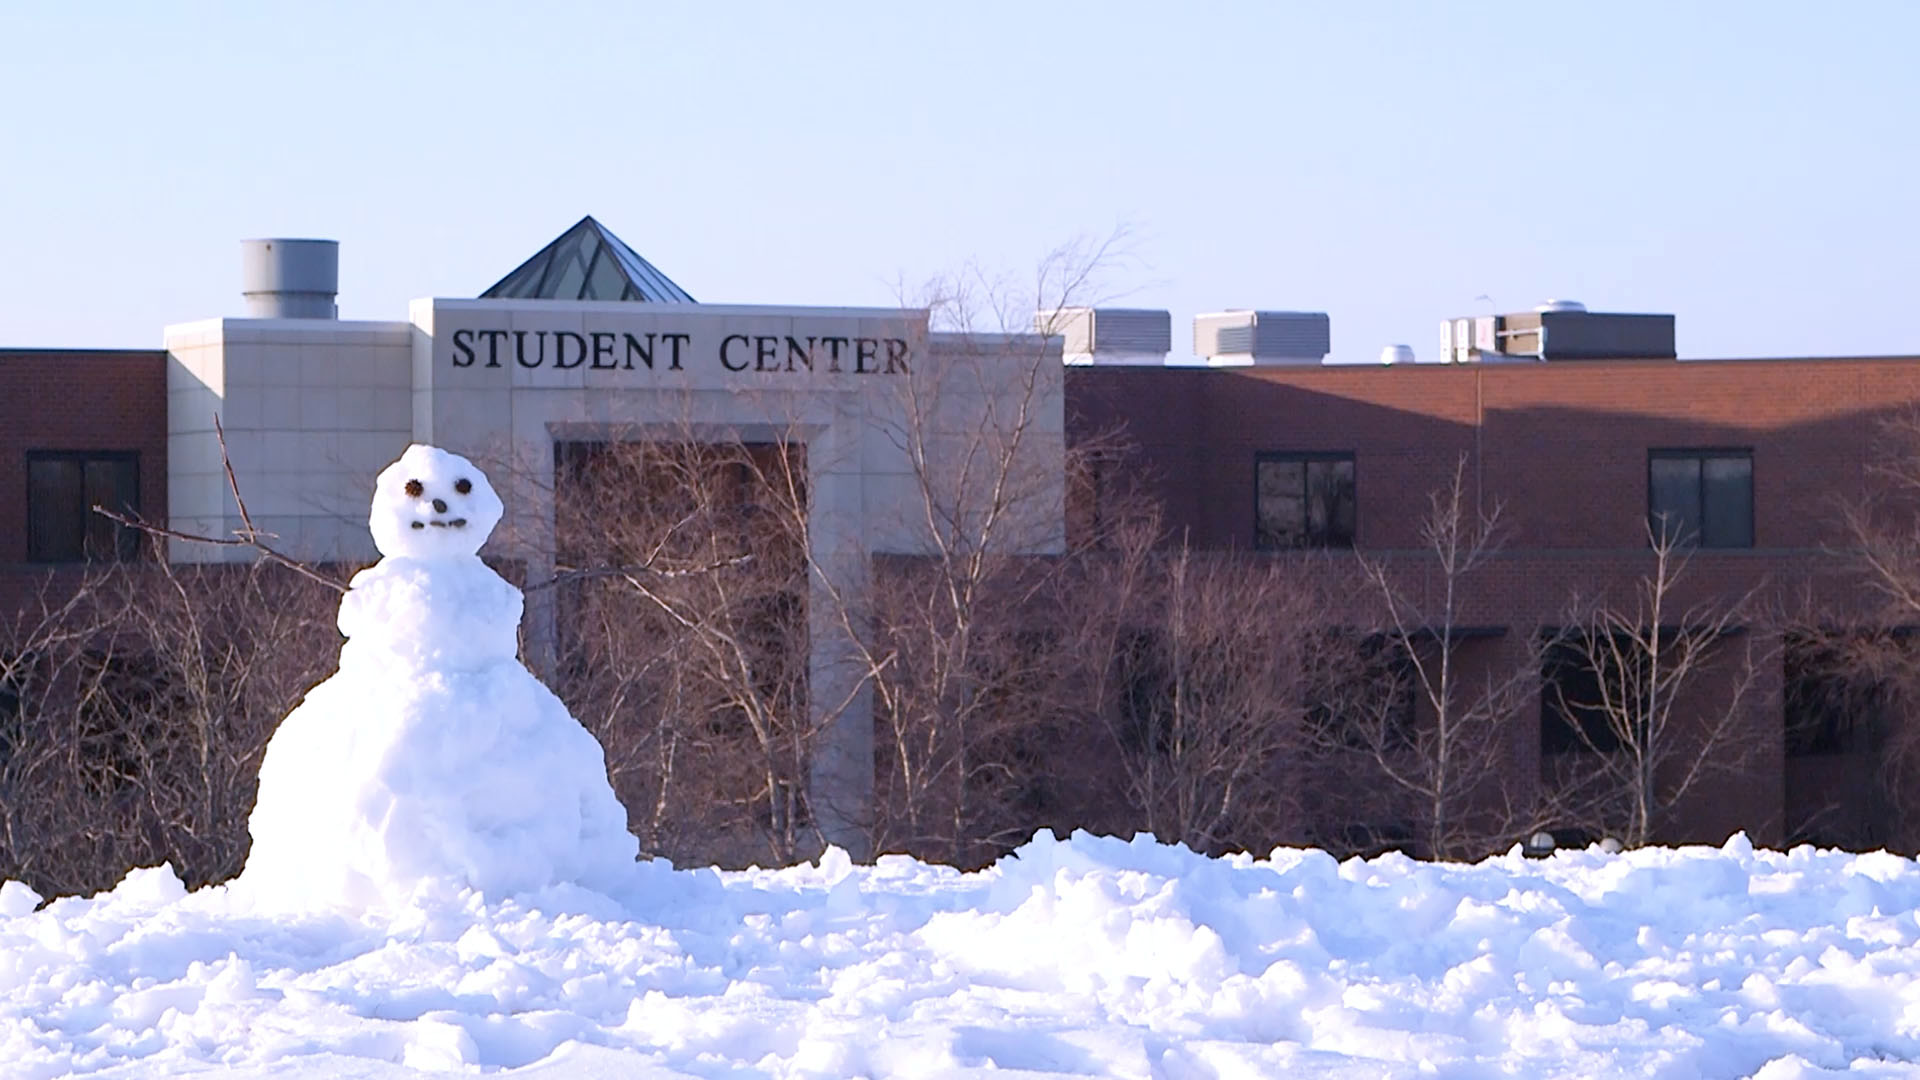 Snowman in the foreground, Student Center in the background